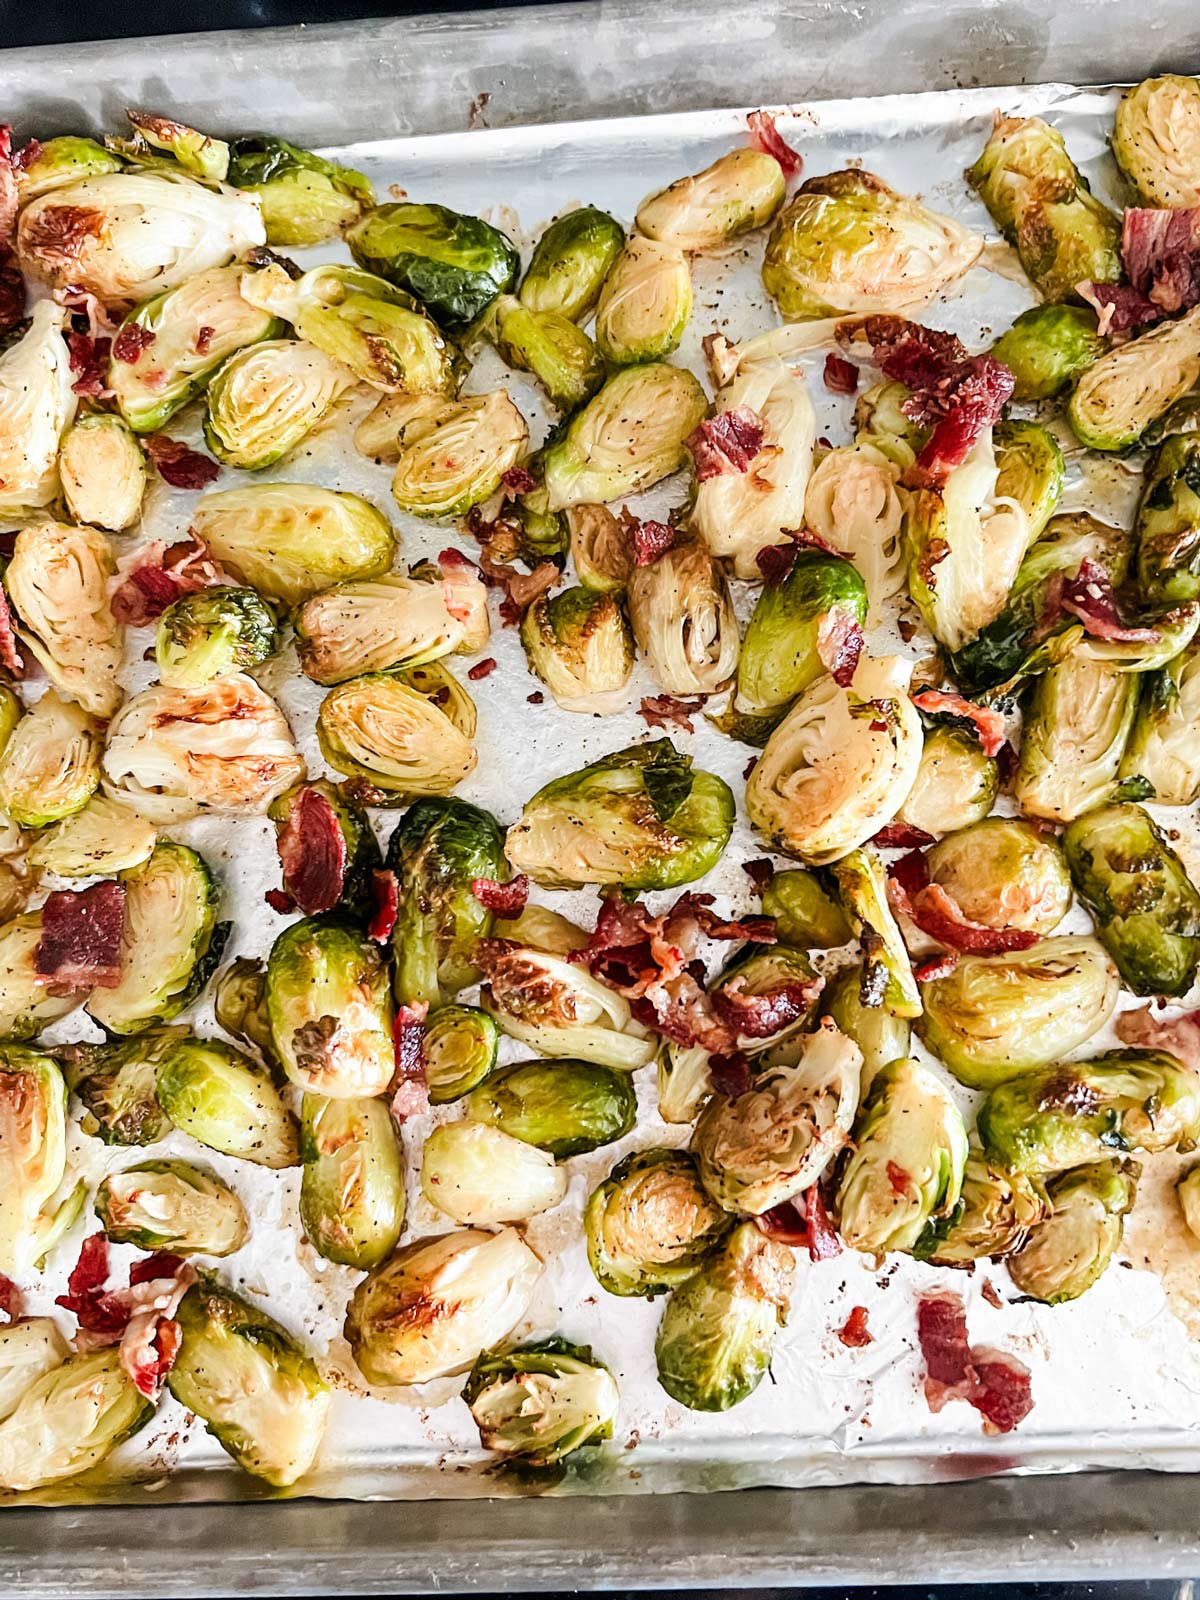 Bacon scattered over Brussels sprouts on a foil lined baking sheet.